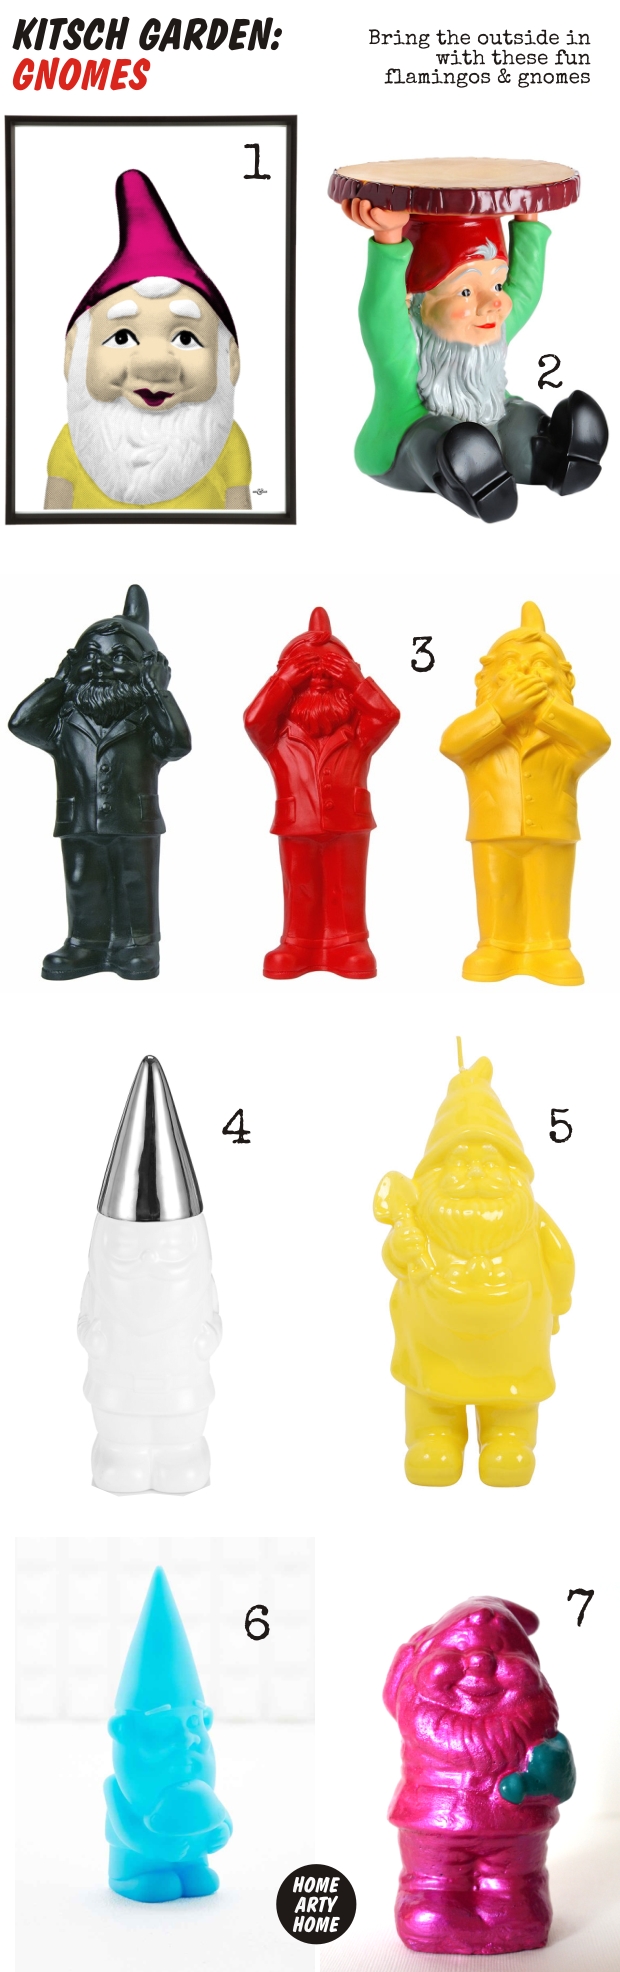 Kitsch_Garden_Gnomes_homeartyhome